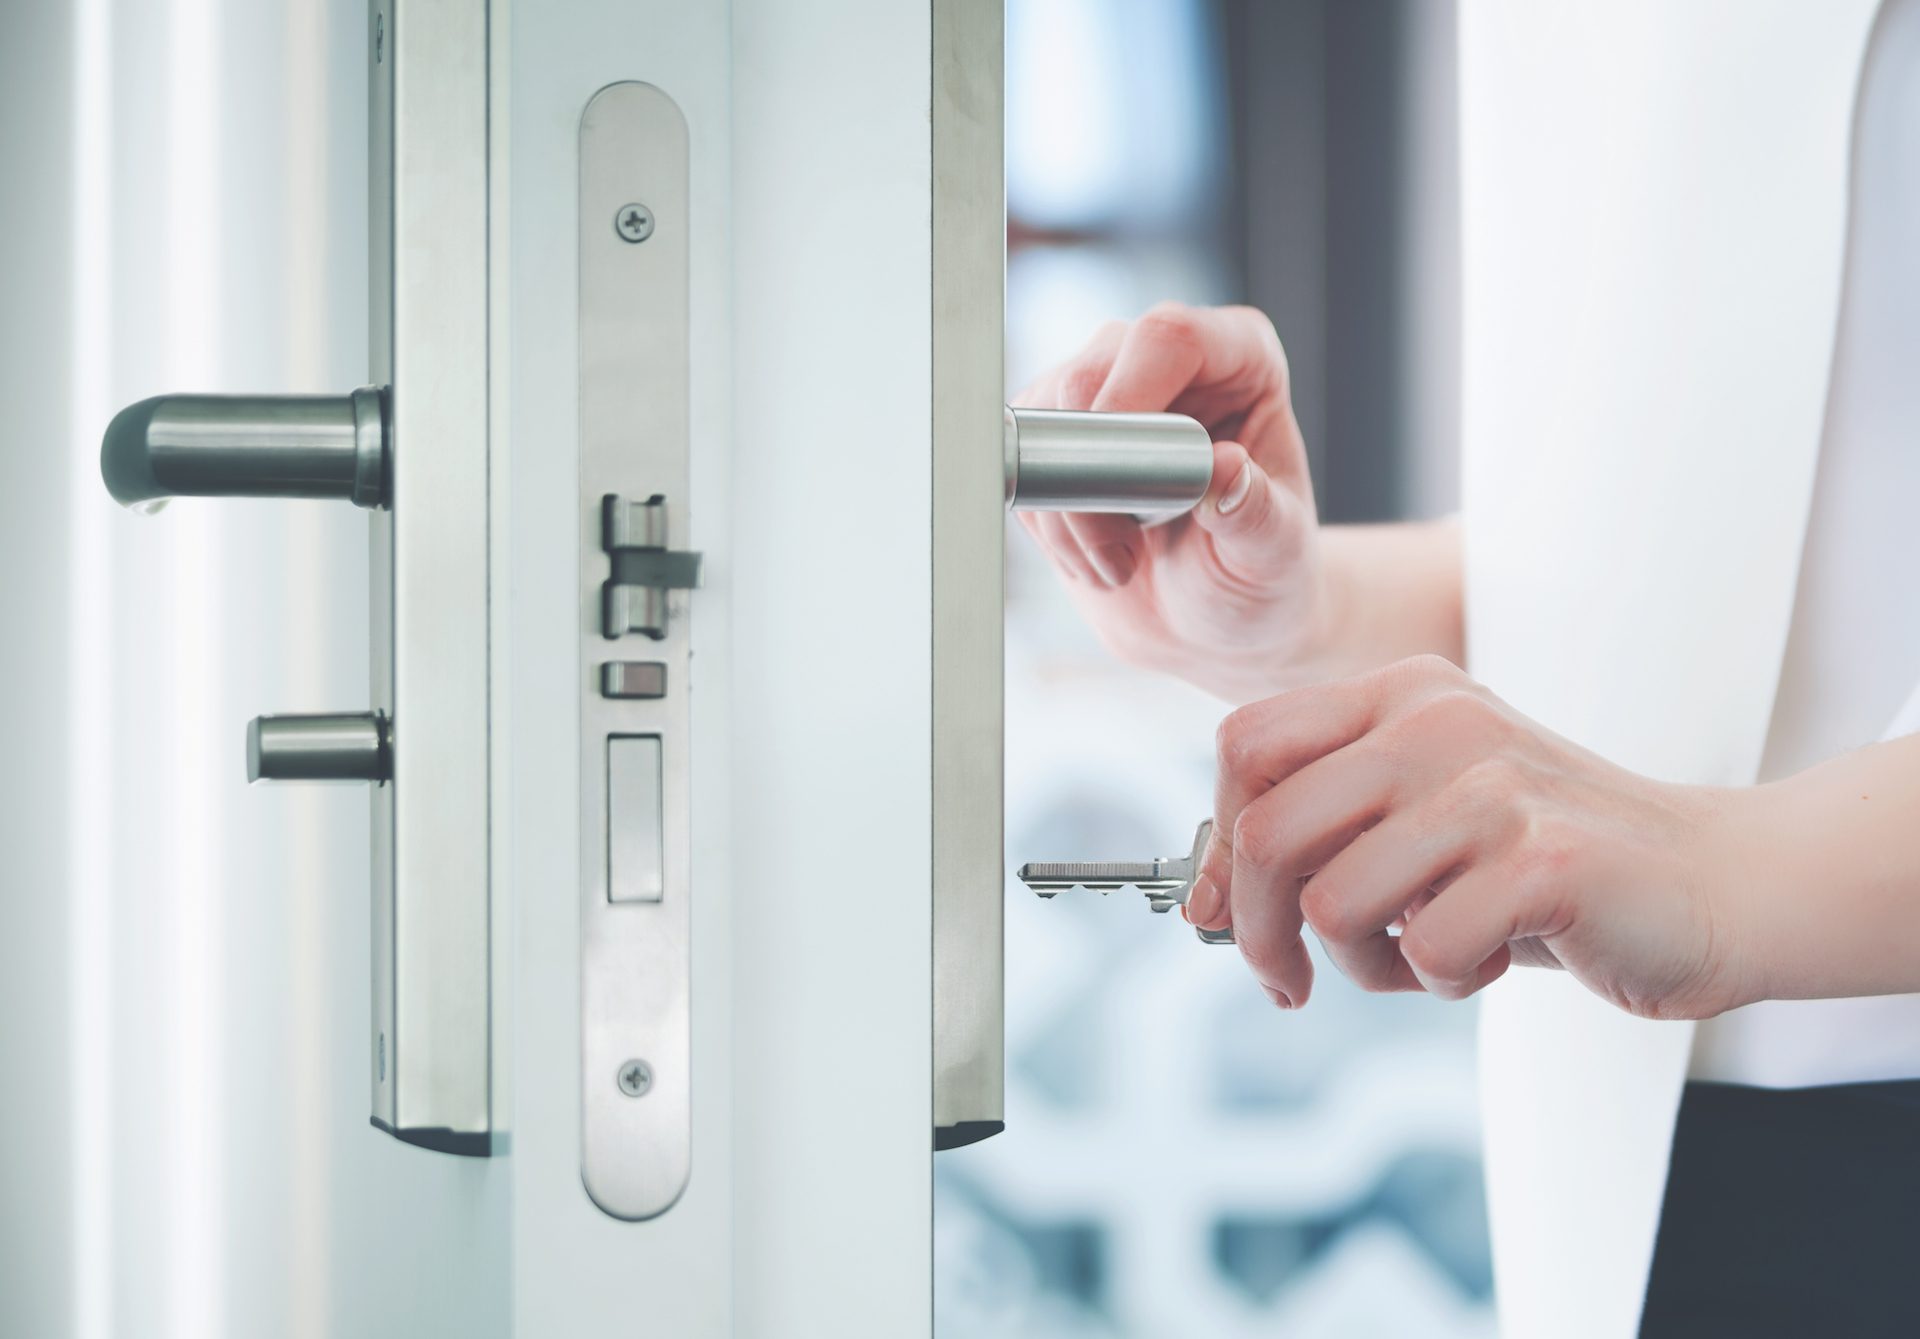 how to prevent a house lockout - The LockSmith Co.